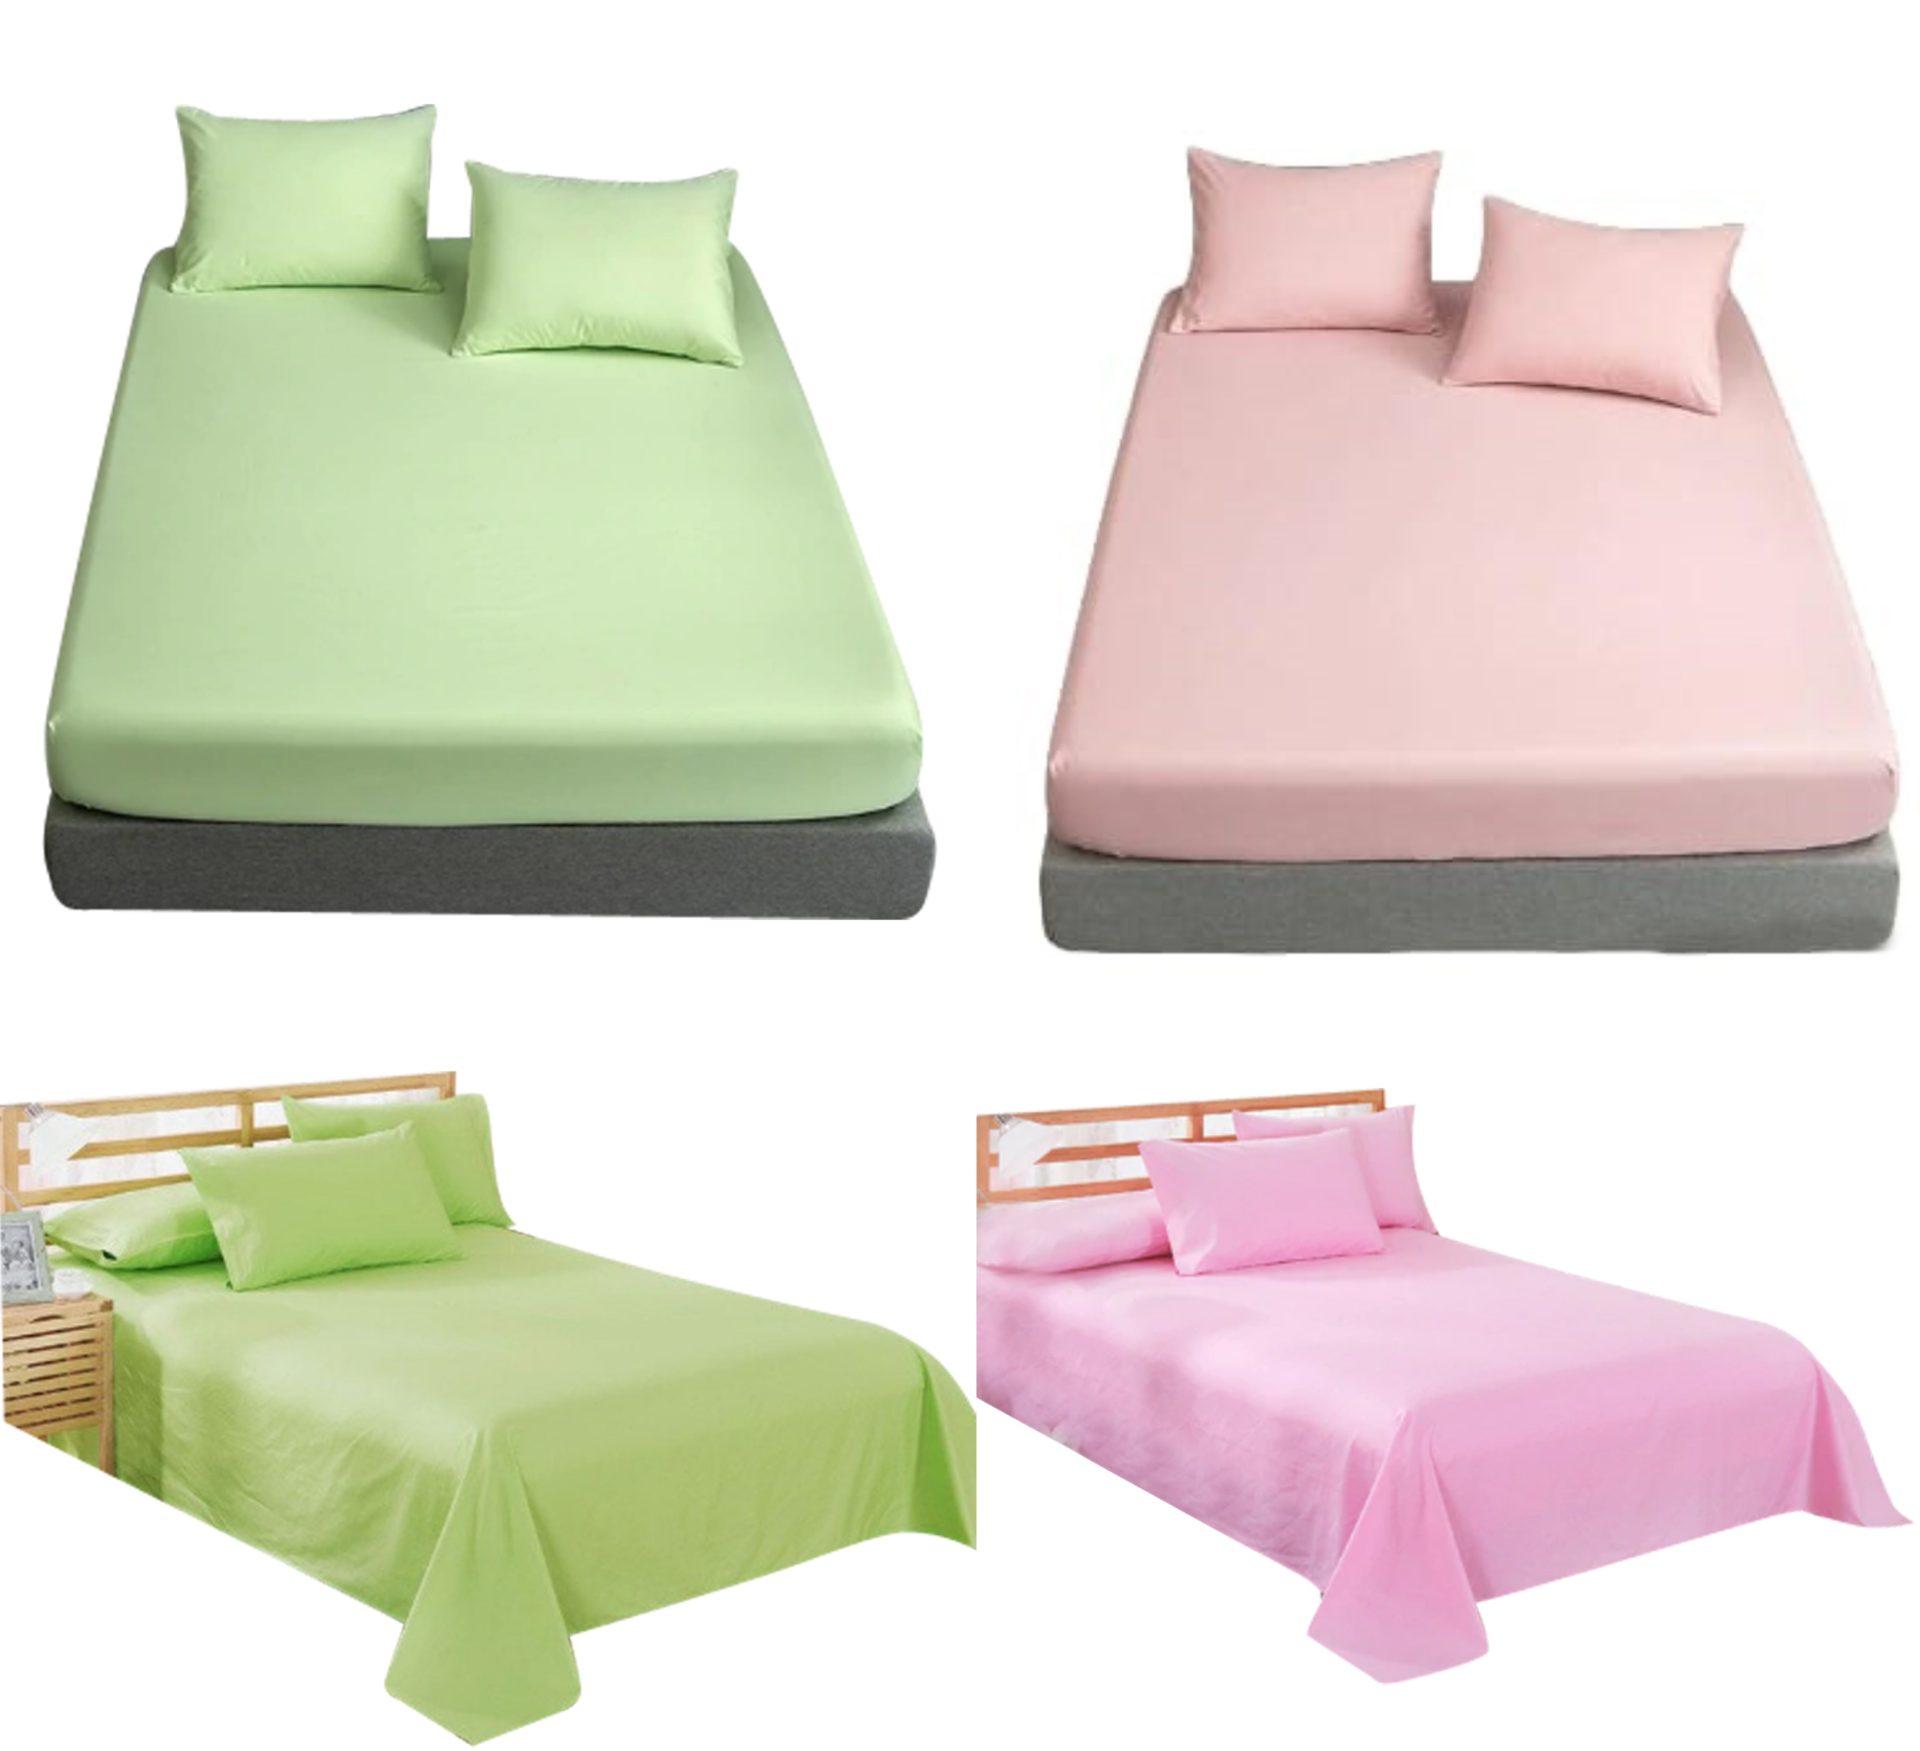 Sheet Sets (Fitted + Flat)